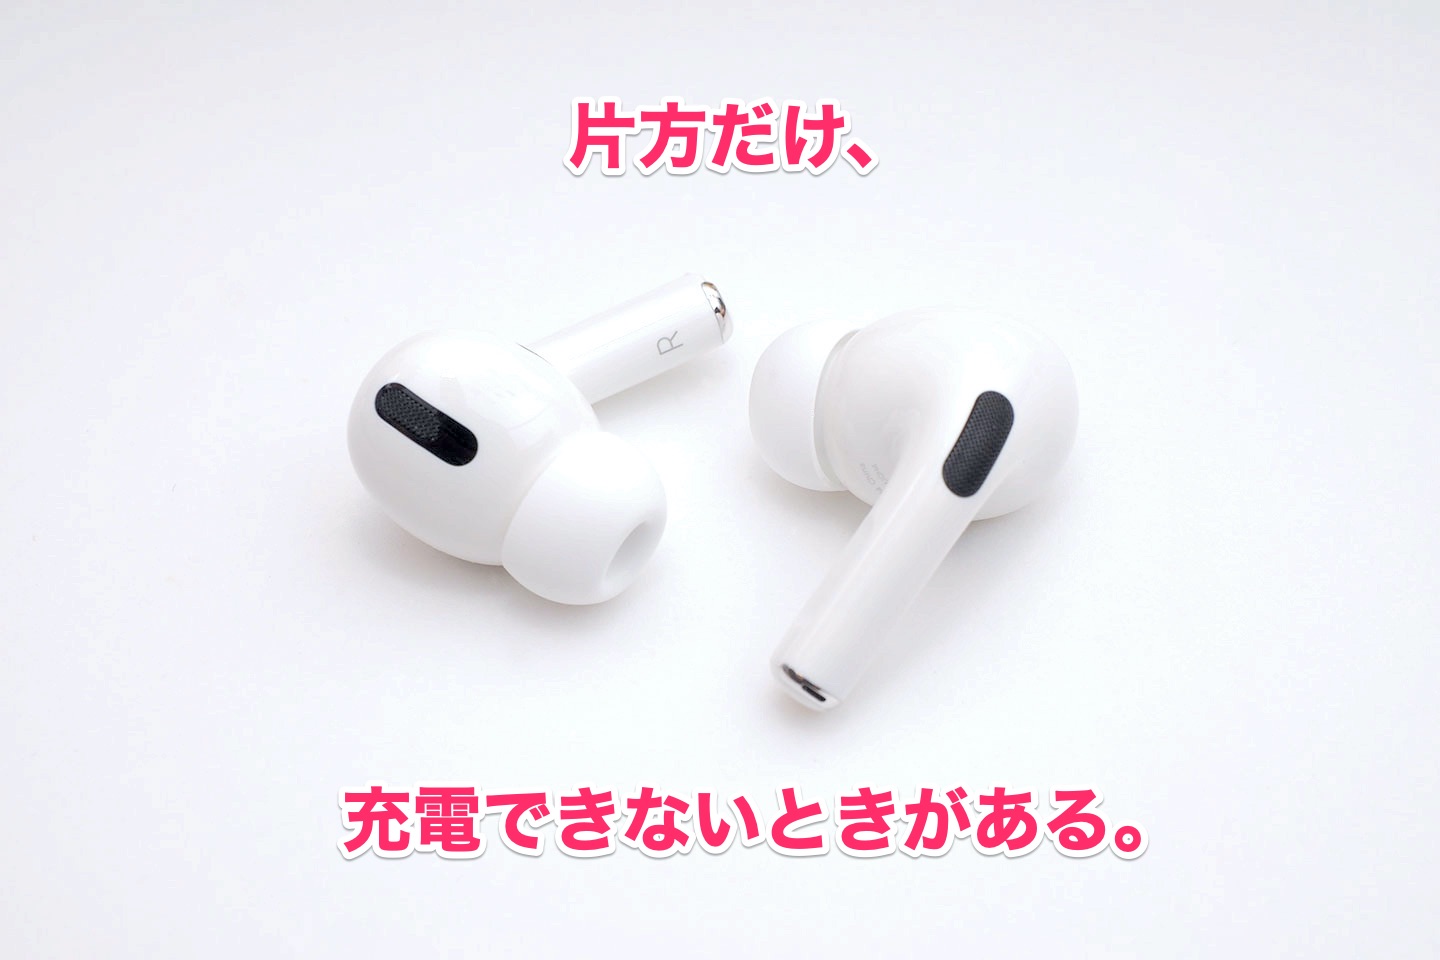 AirPods / AirPods Pro が片方だけ充電されない不具合の解決方法